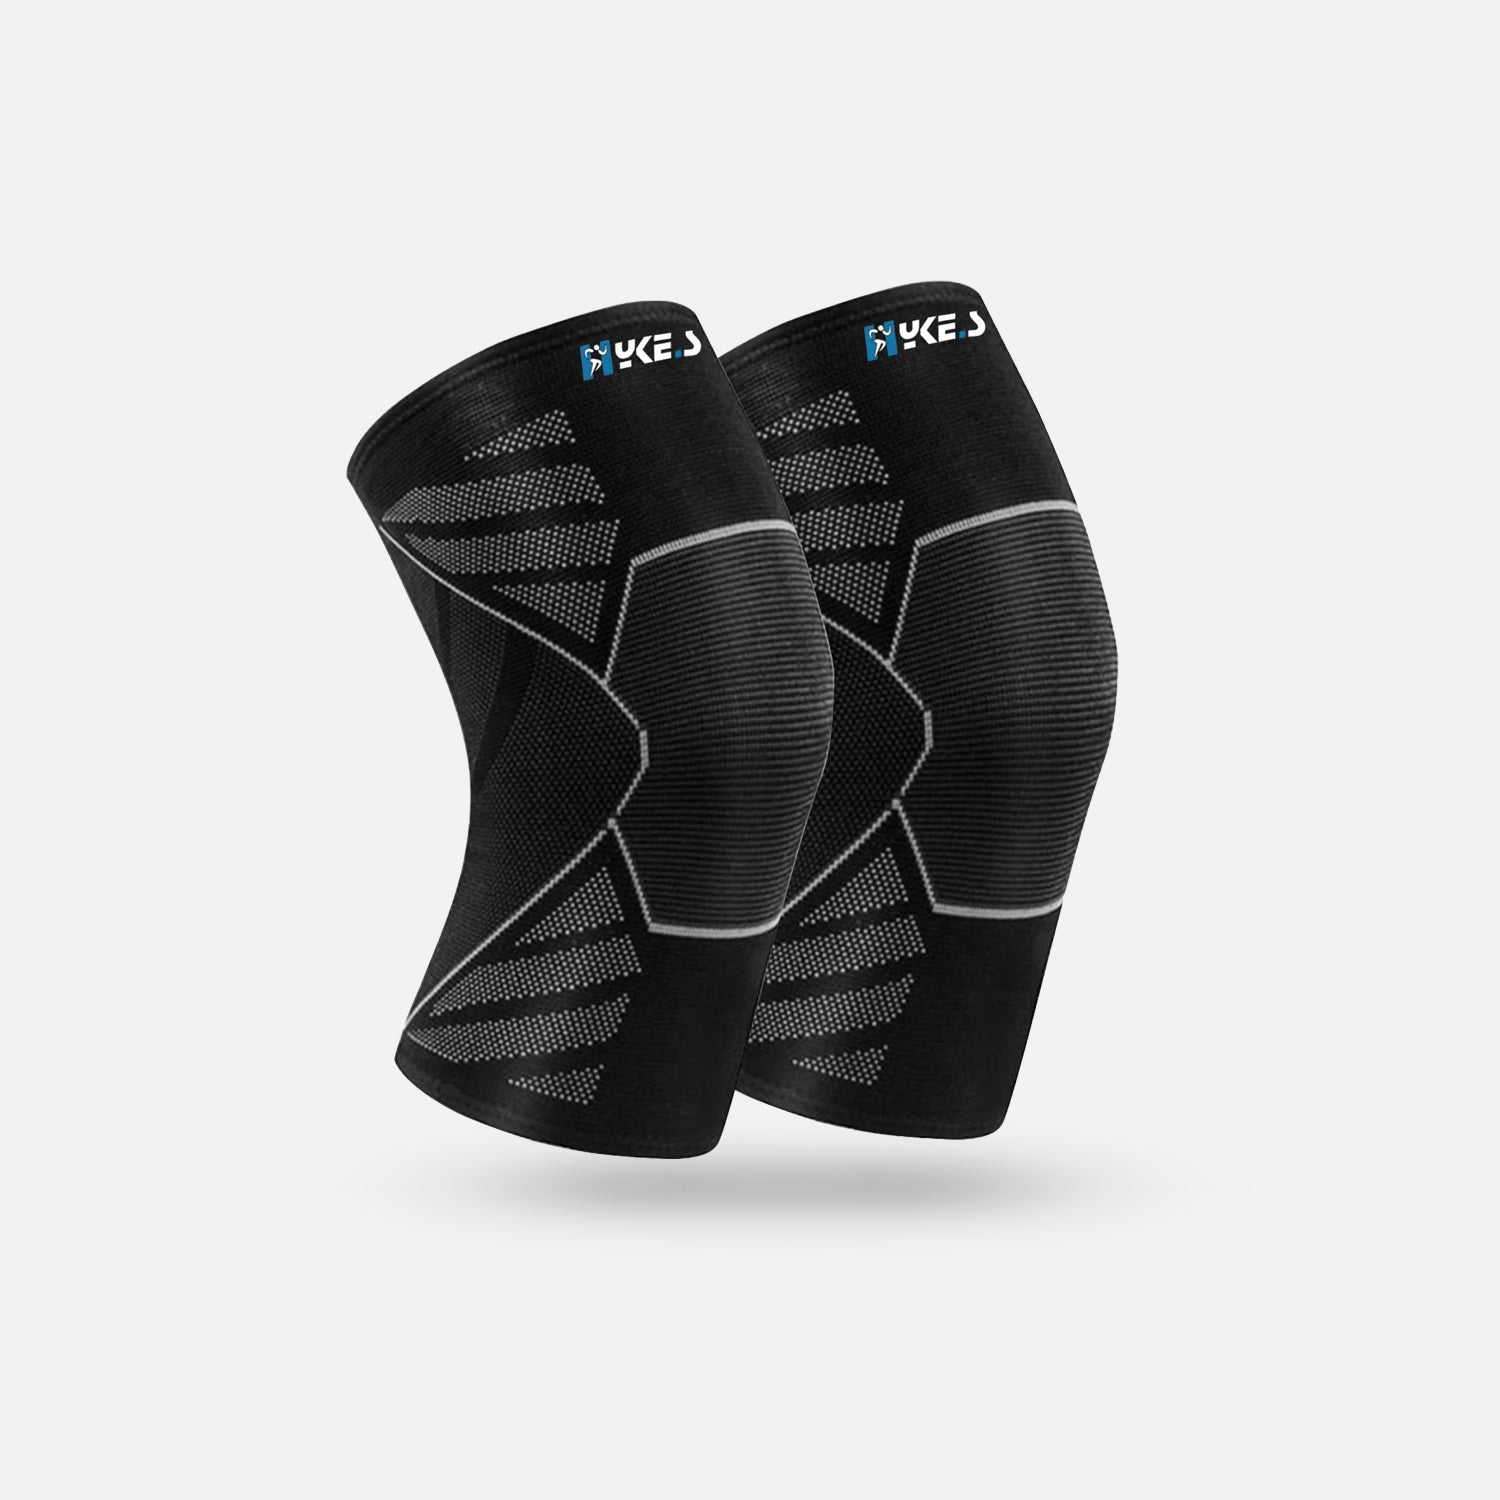 Knee Cap Support for Workout & Jogging